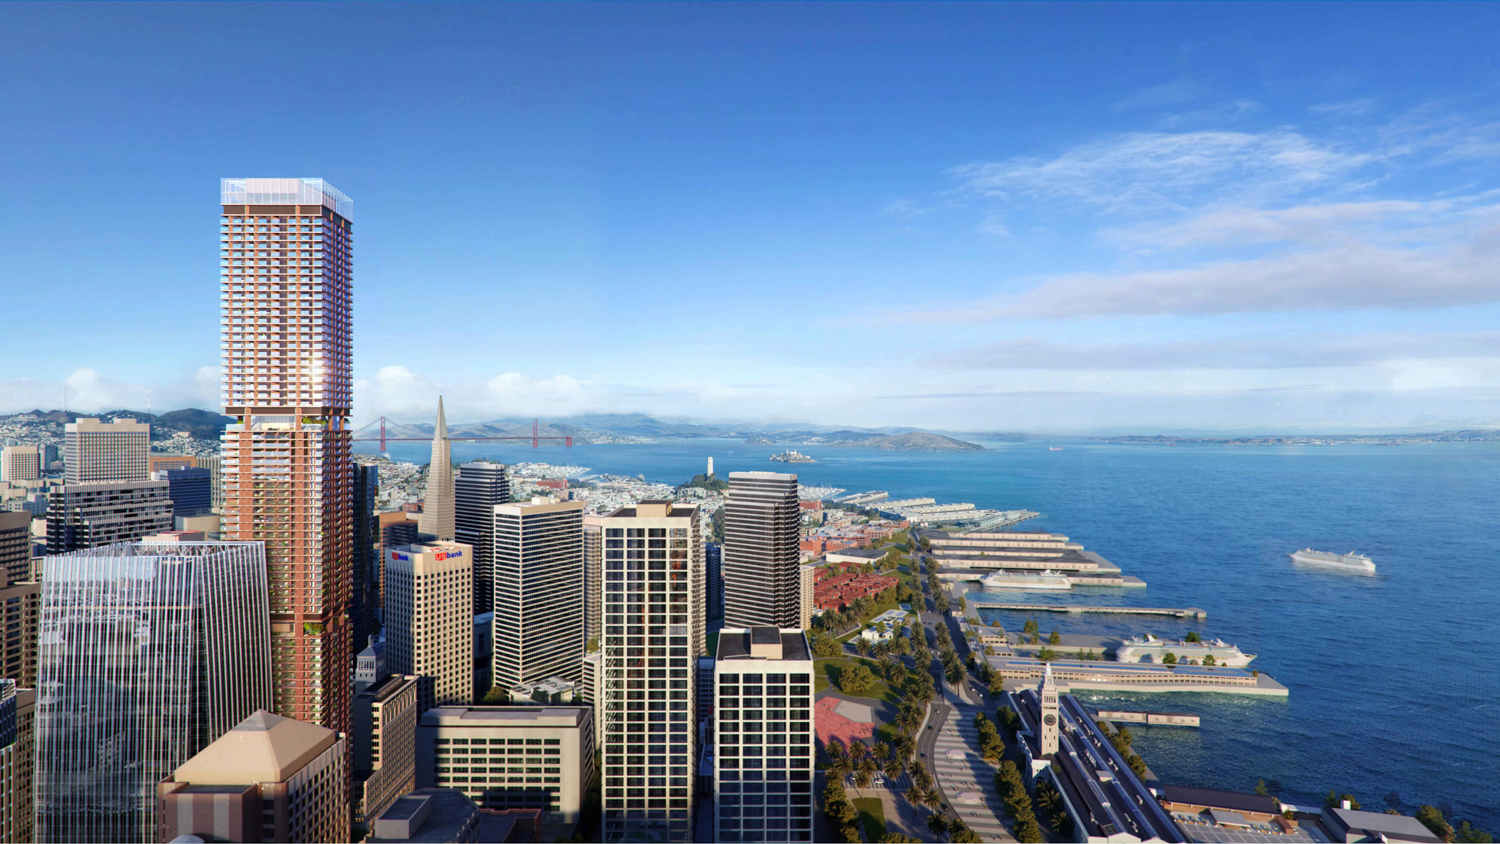 50 Main Street aerial perspective from over Embarcadero, design by Foster + Partners